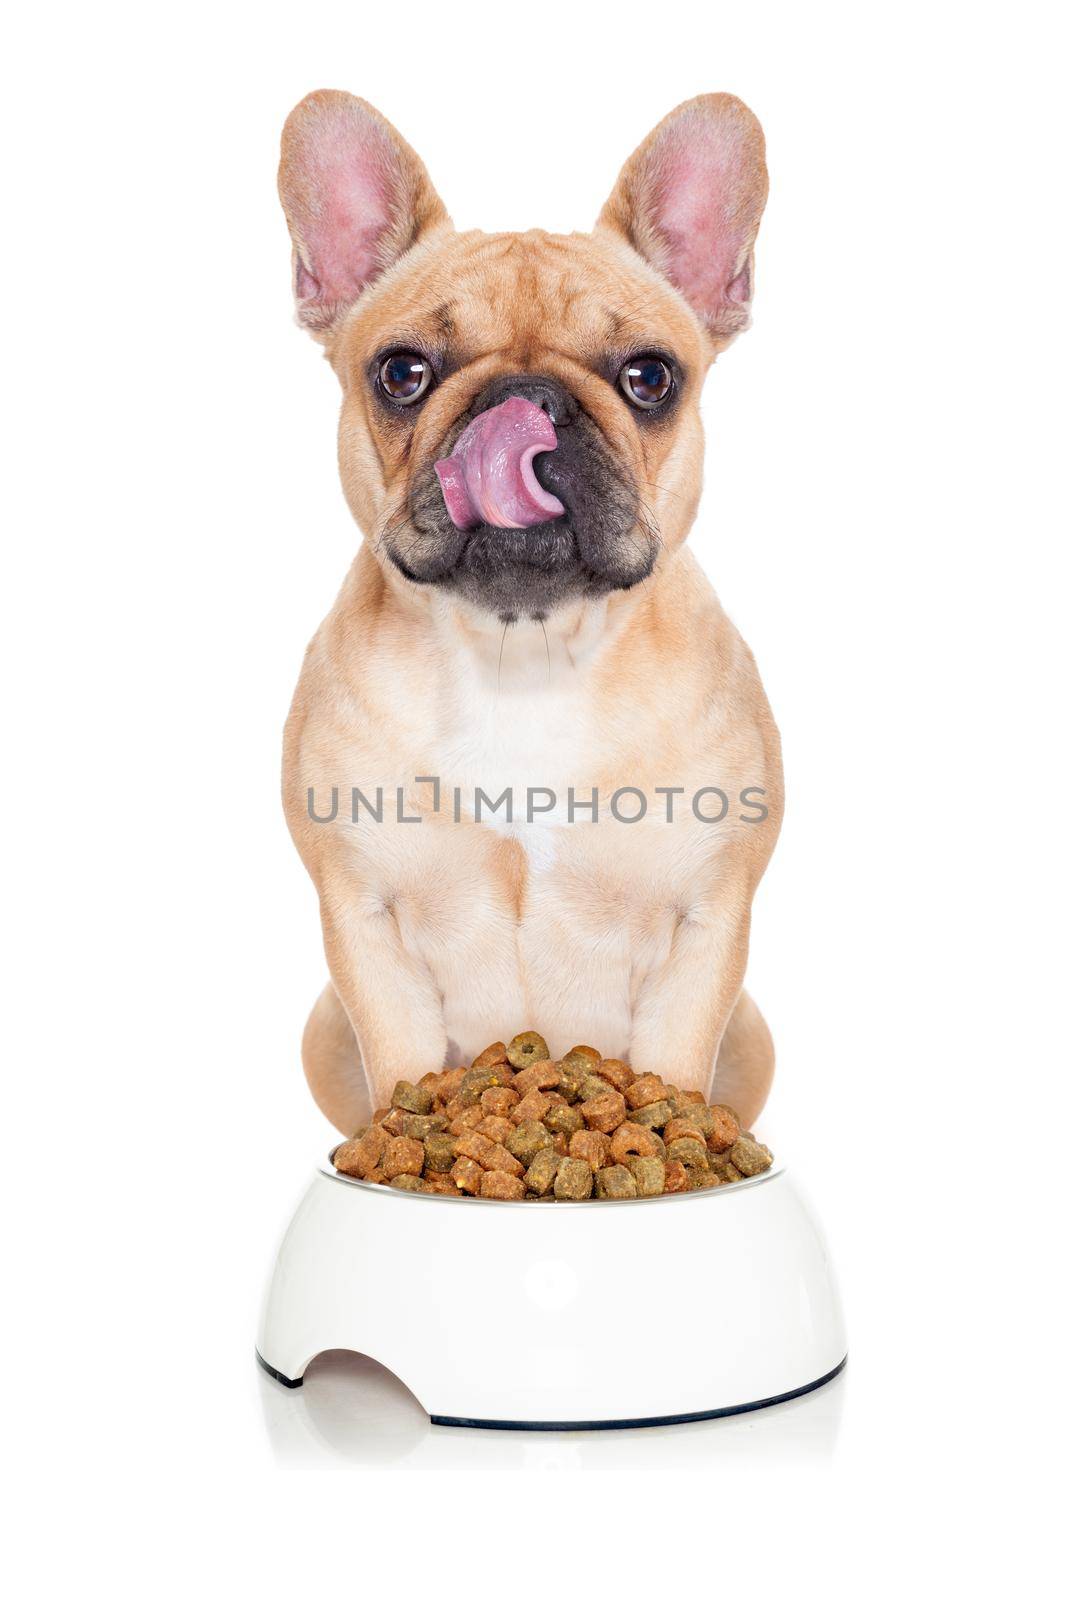 fawn hungry french bulldog dog  ready to eat dinner or lunch , behind food bowl. tongue sticking out , isolated on white background